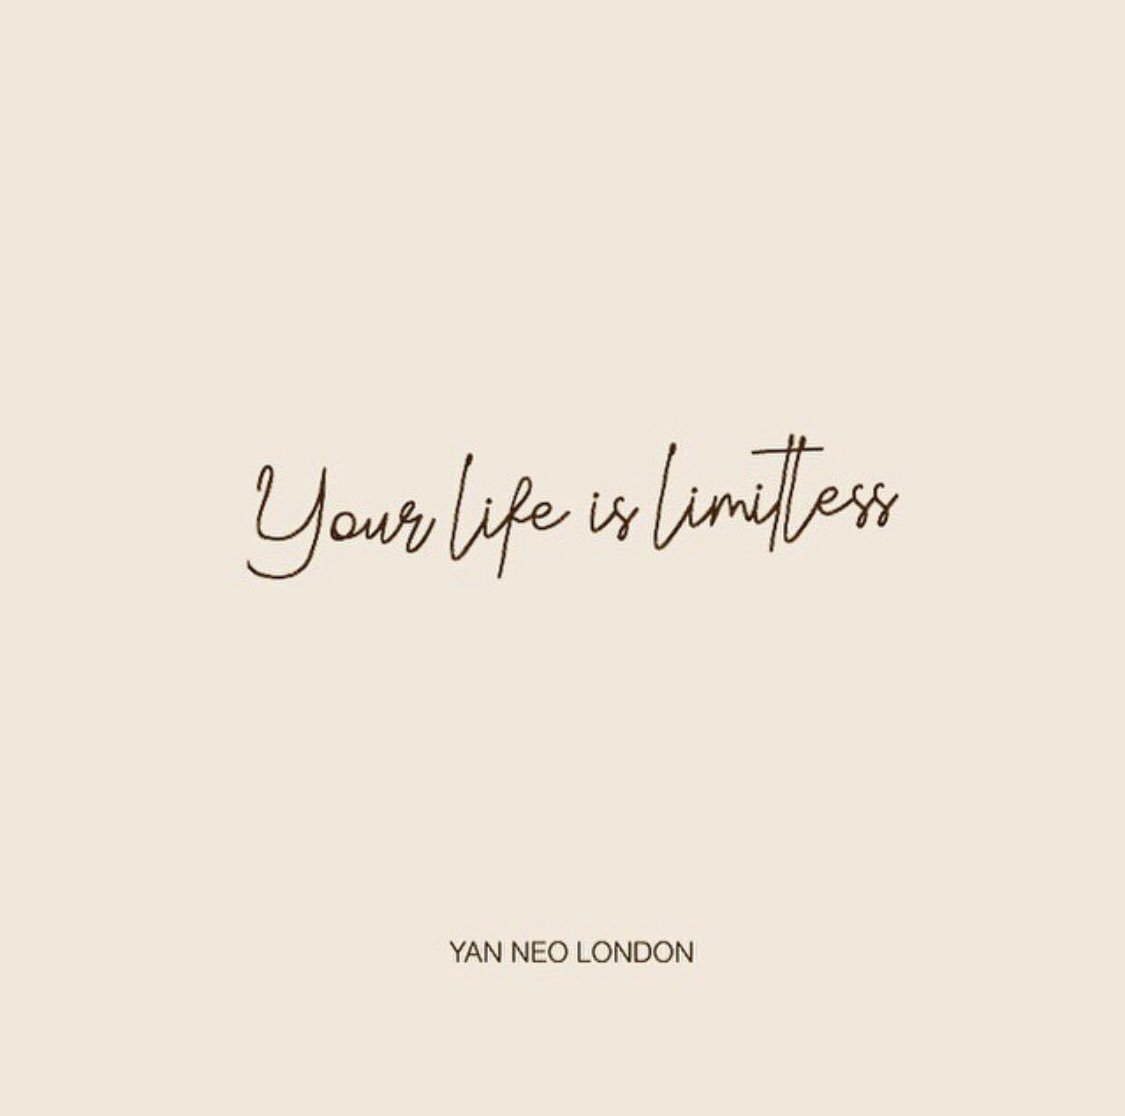 Hump day reminder : Your life is limitless! 💭 #yanneoofficial

#quoteoftheday #quoteit #quoteinspo #neutralpalette #neutralaesthetic #nudetones #motivation #motivating #quoteinspo #inspoquote #inspomood #inspocafe #inspodaily #quotes #love #life #weeekendmood #quote #inspiration